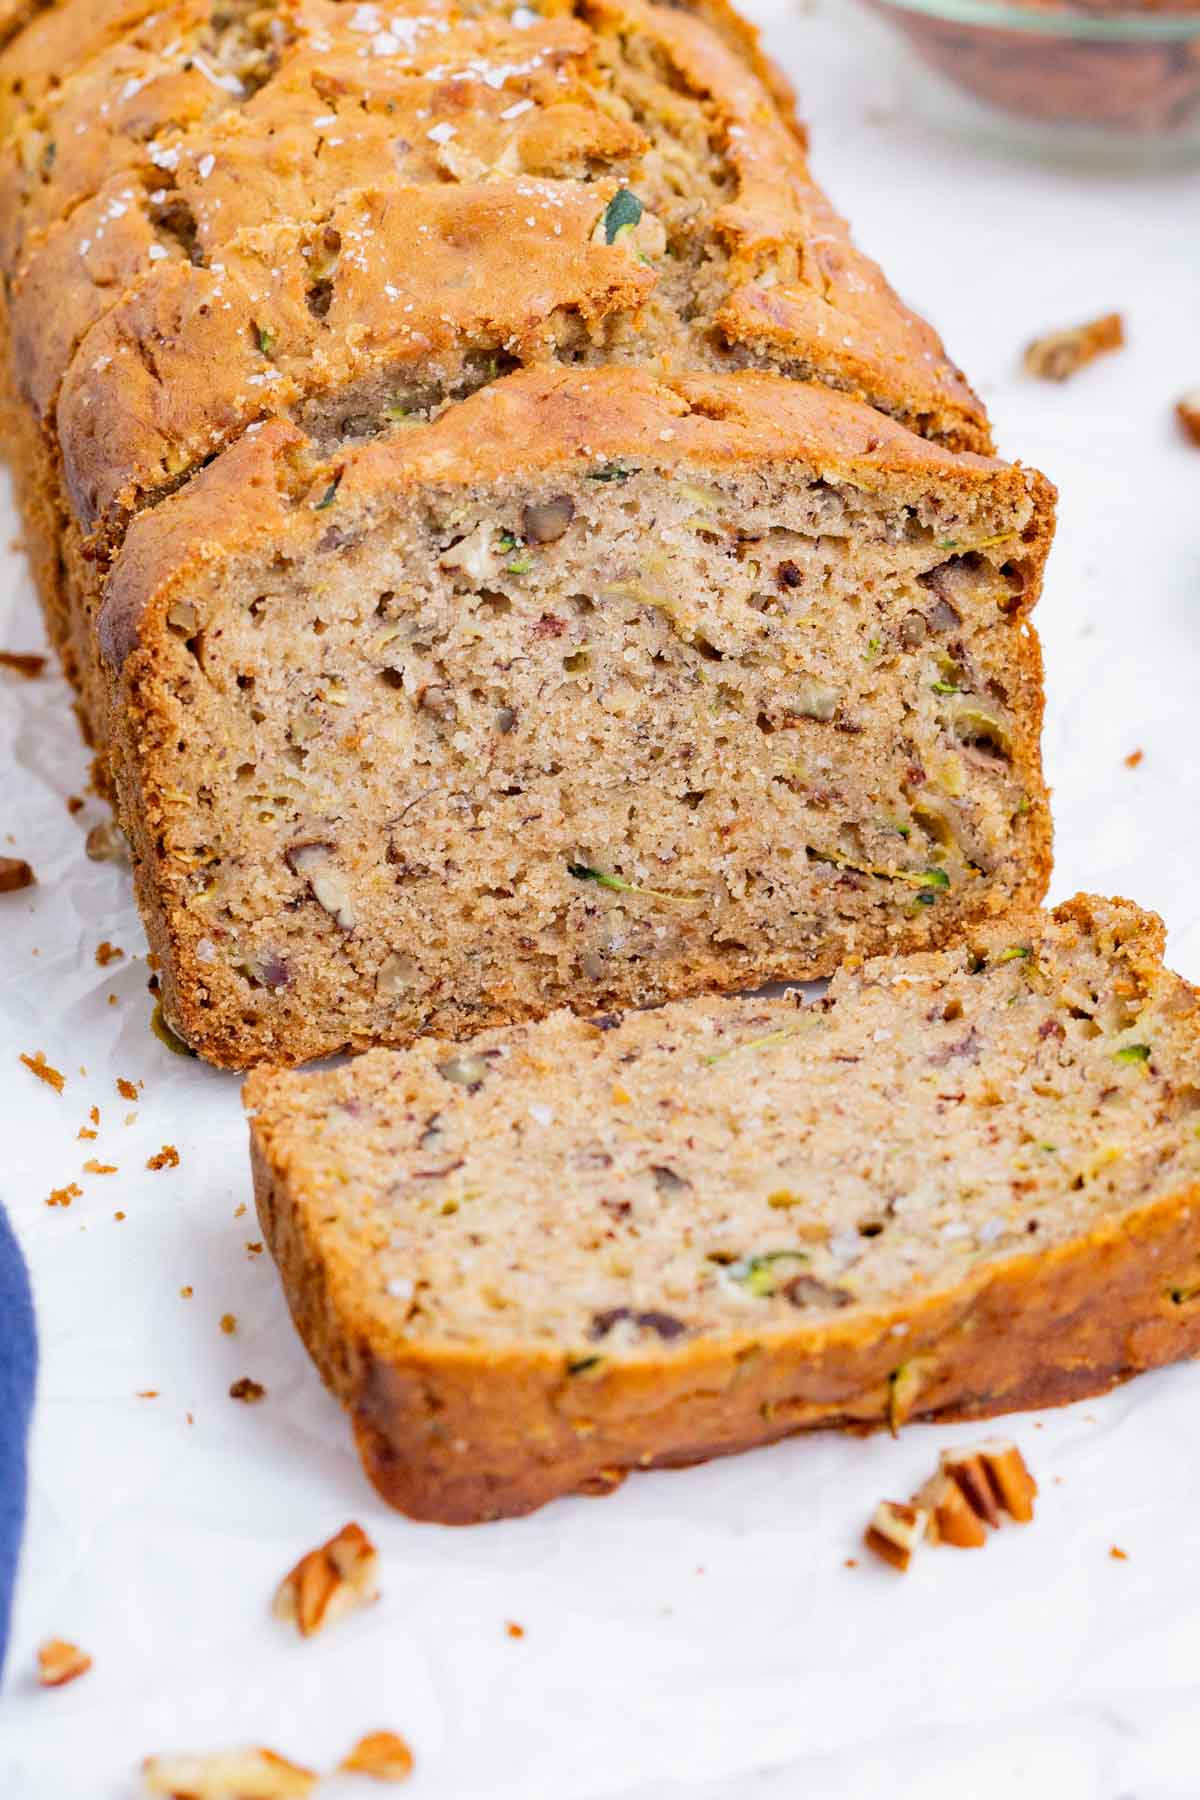 Both banana and zucchini add so much moisture to this rich bread.